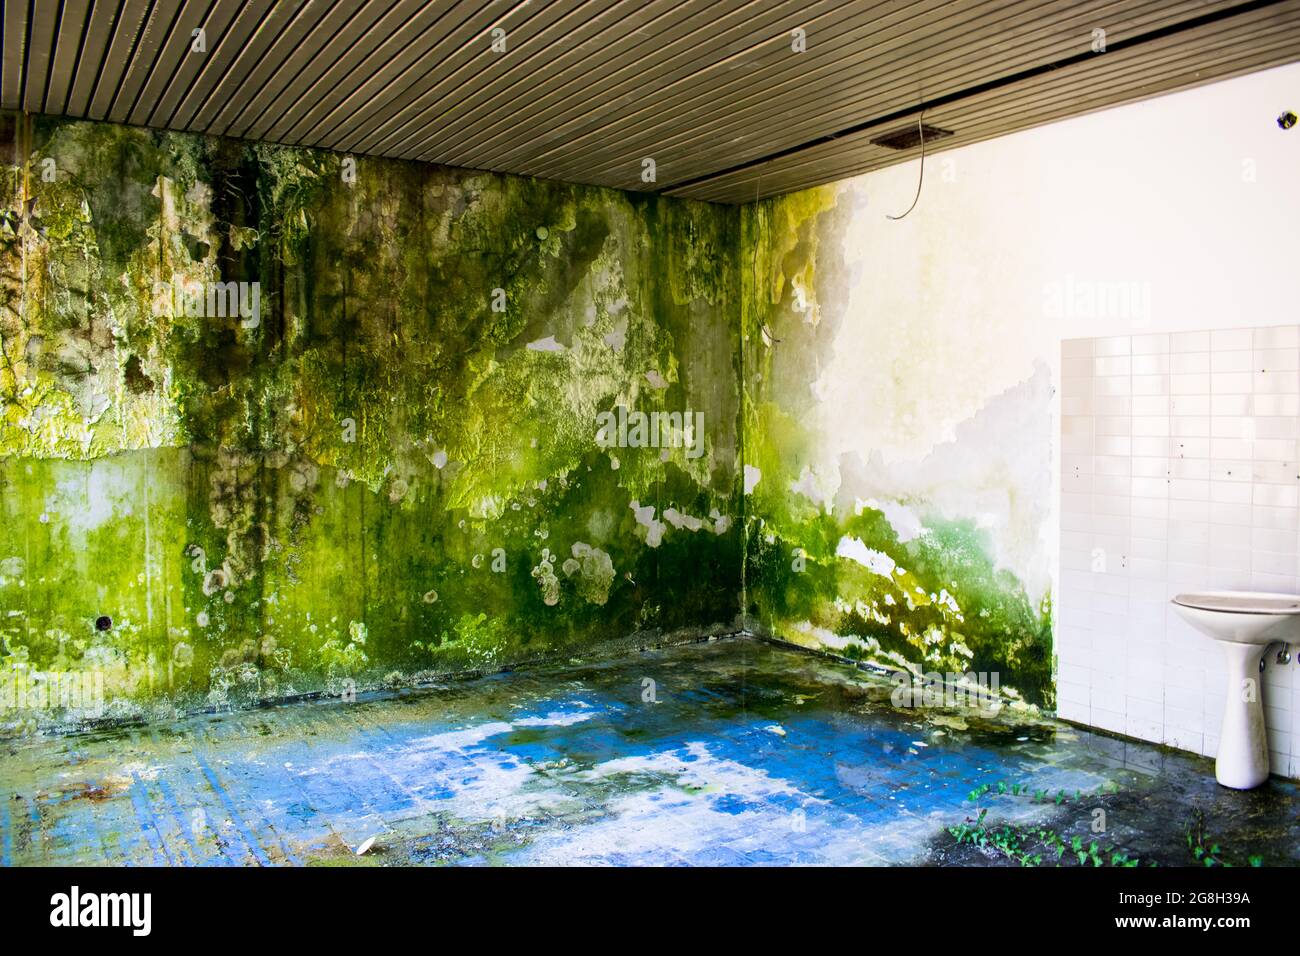 Moss grows on an interior wall Humid Some poison ivy Toilet sink white and blue tiles Stock Photo